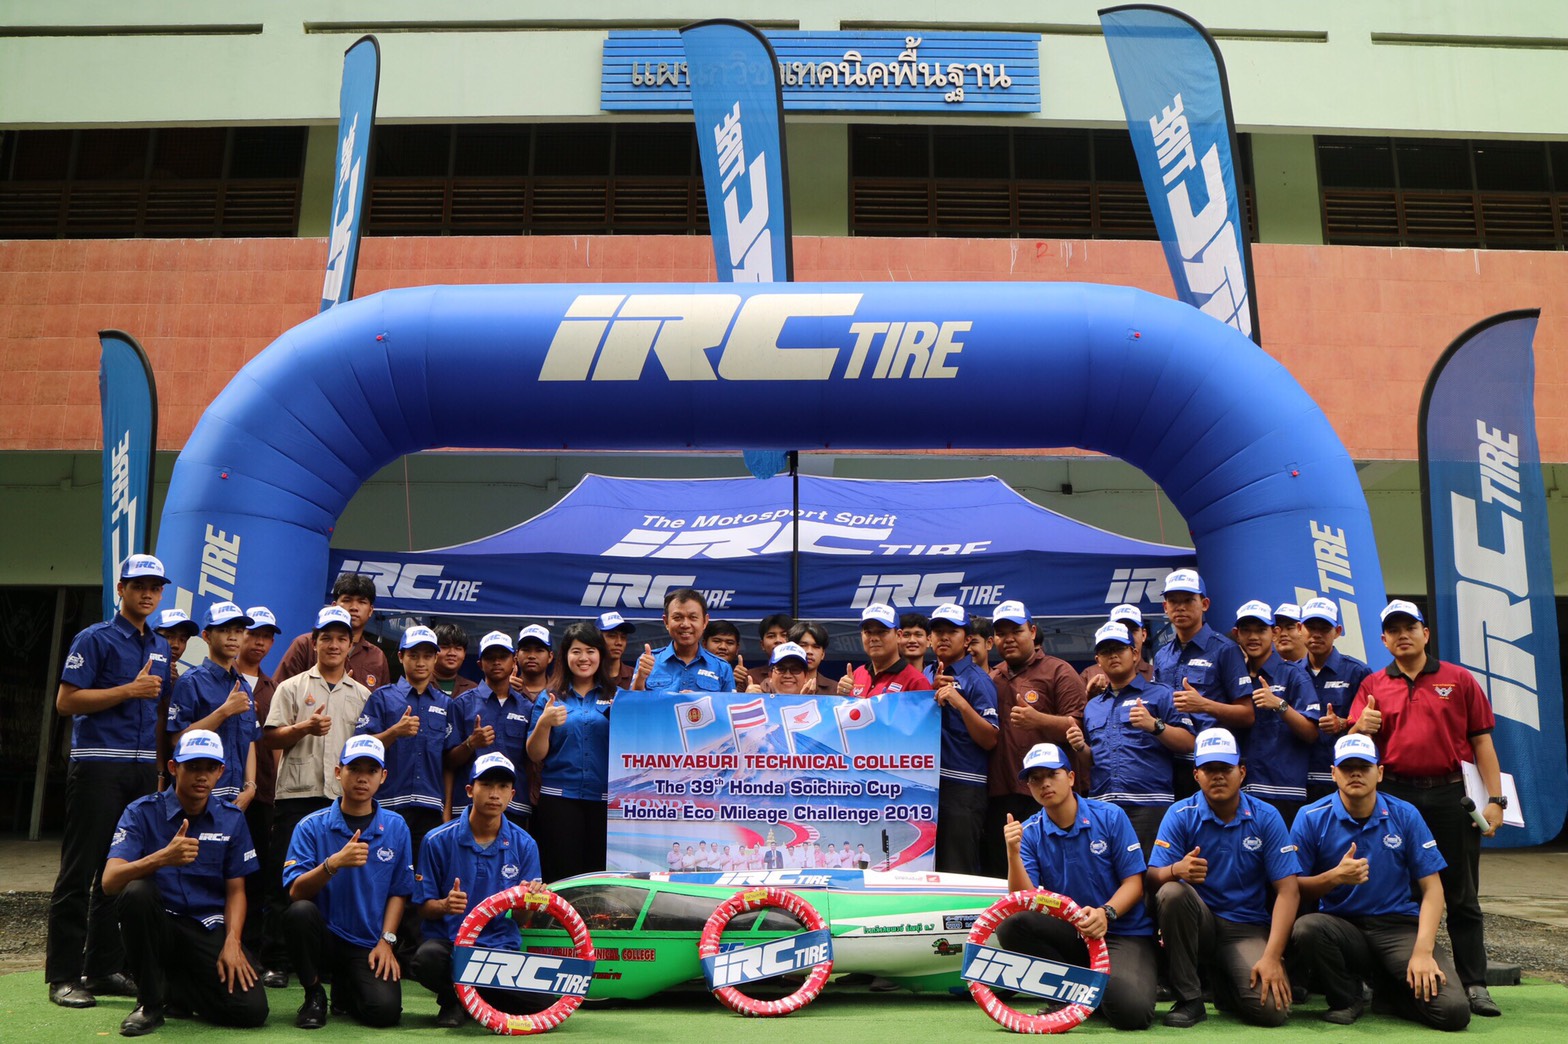 IRC supports Eco-run motorcycle tires for eco-motorcycle to vocational college in order to join “The 39th Honda Soichiro cup Honda Eco Mileage Challenge 2019” at Japan